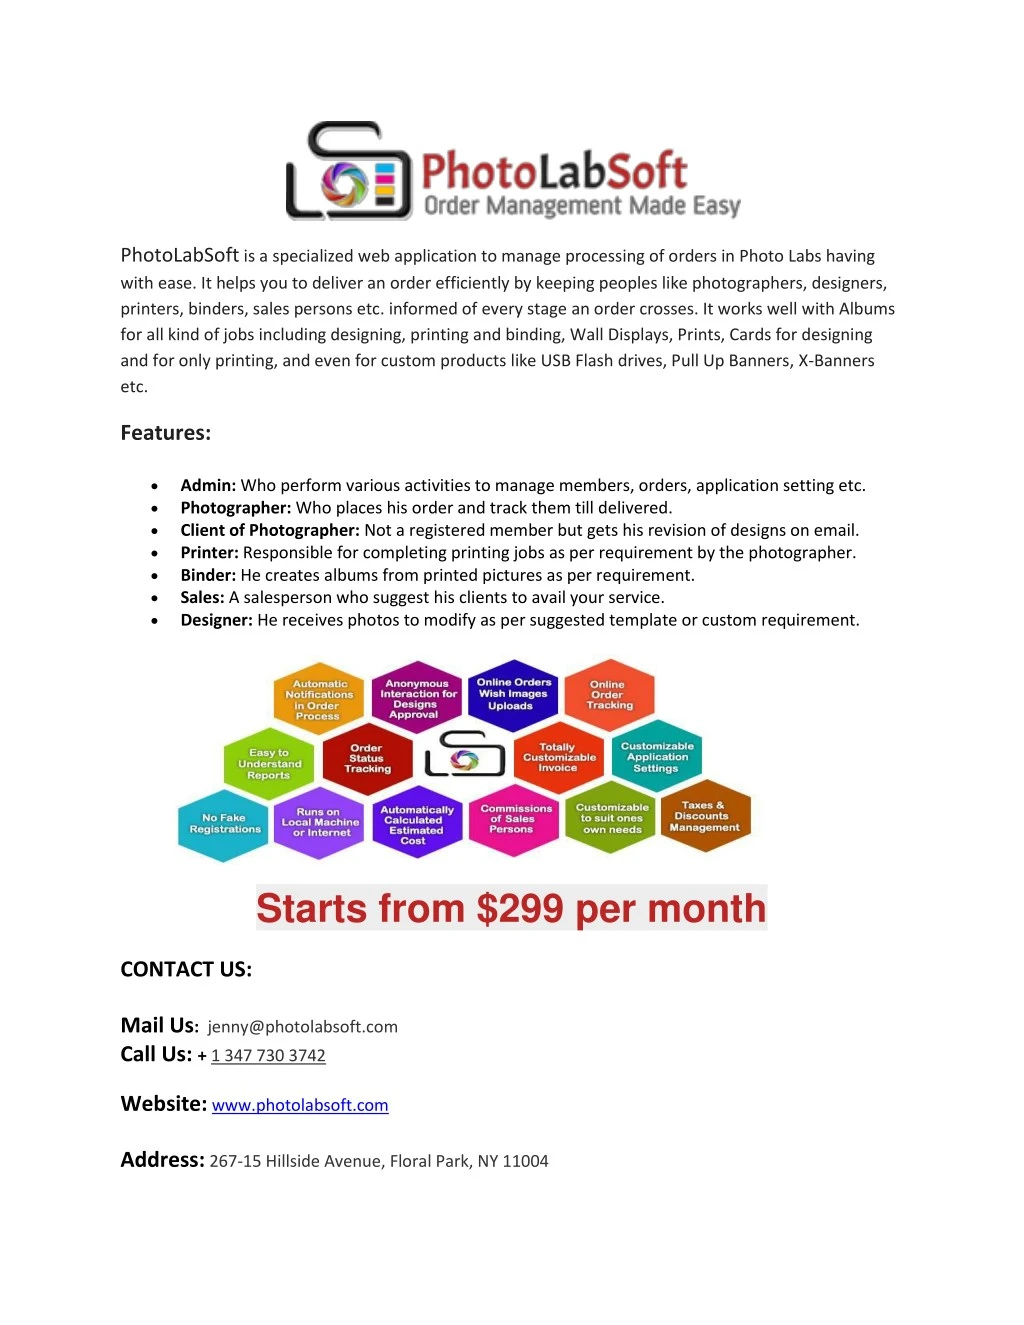 photolabsoft is a specialized web application